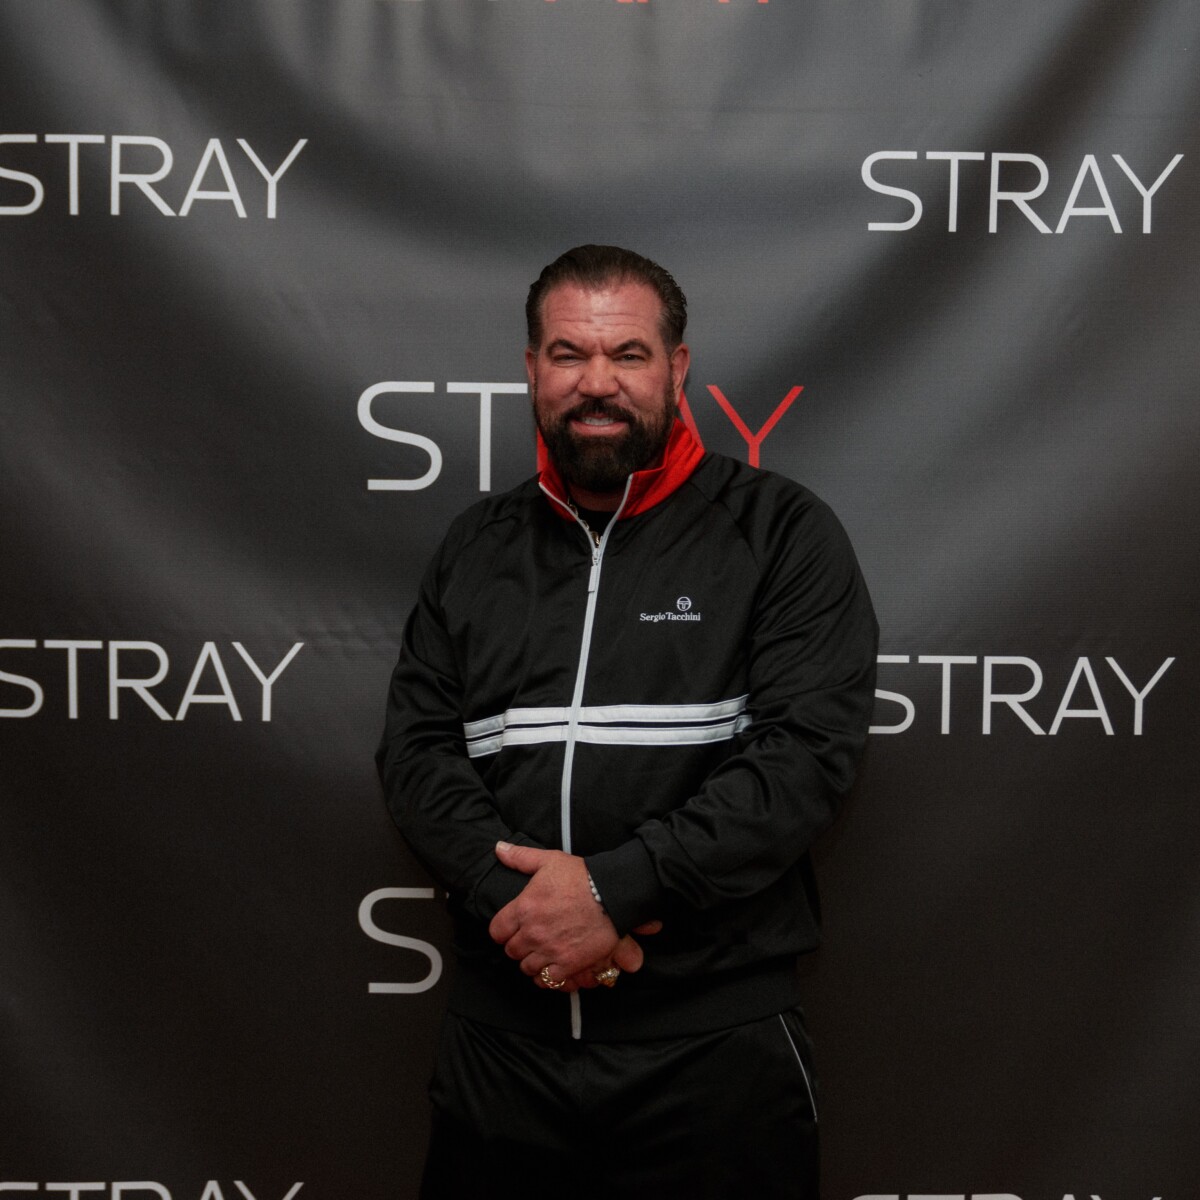 actor bruce soscia posting for a photo at the stray movie announcement event